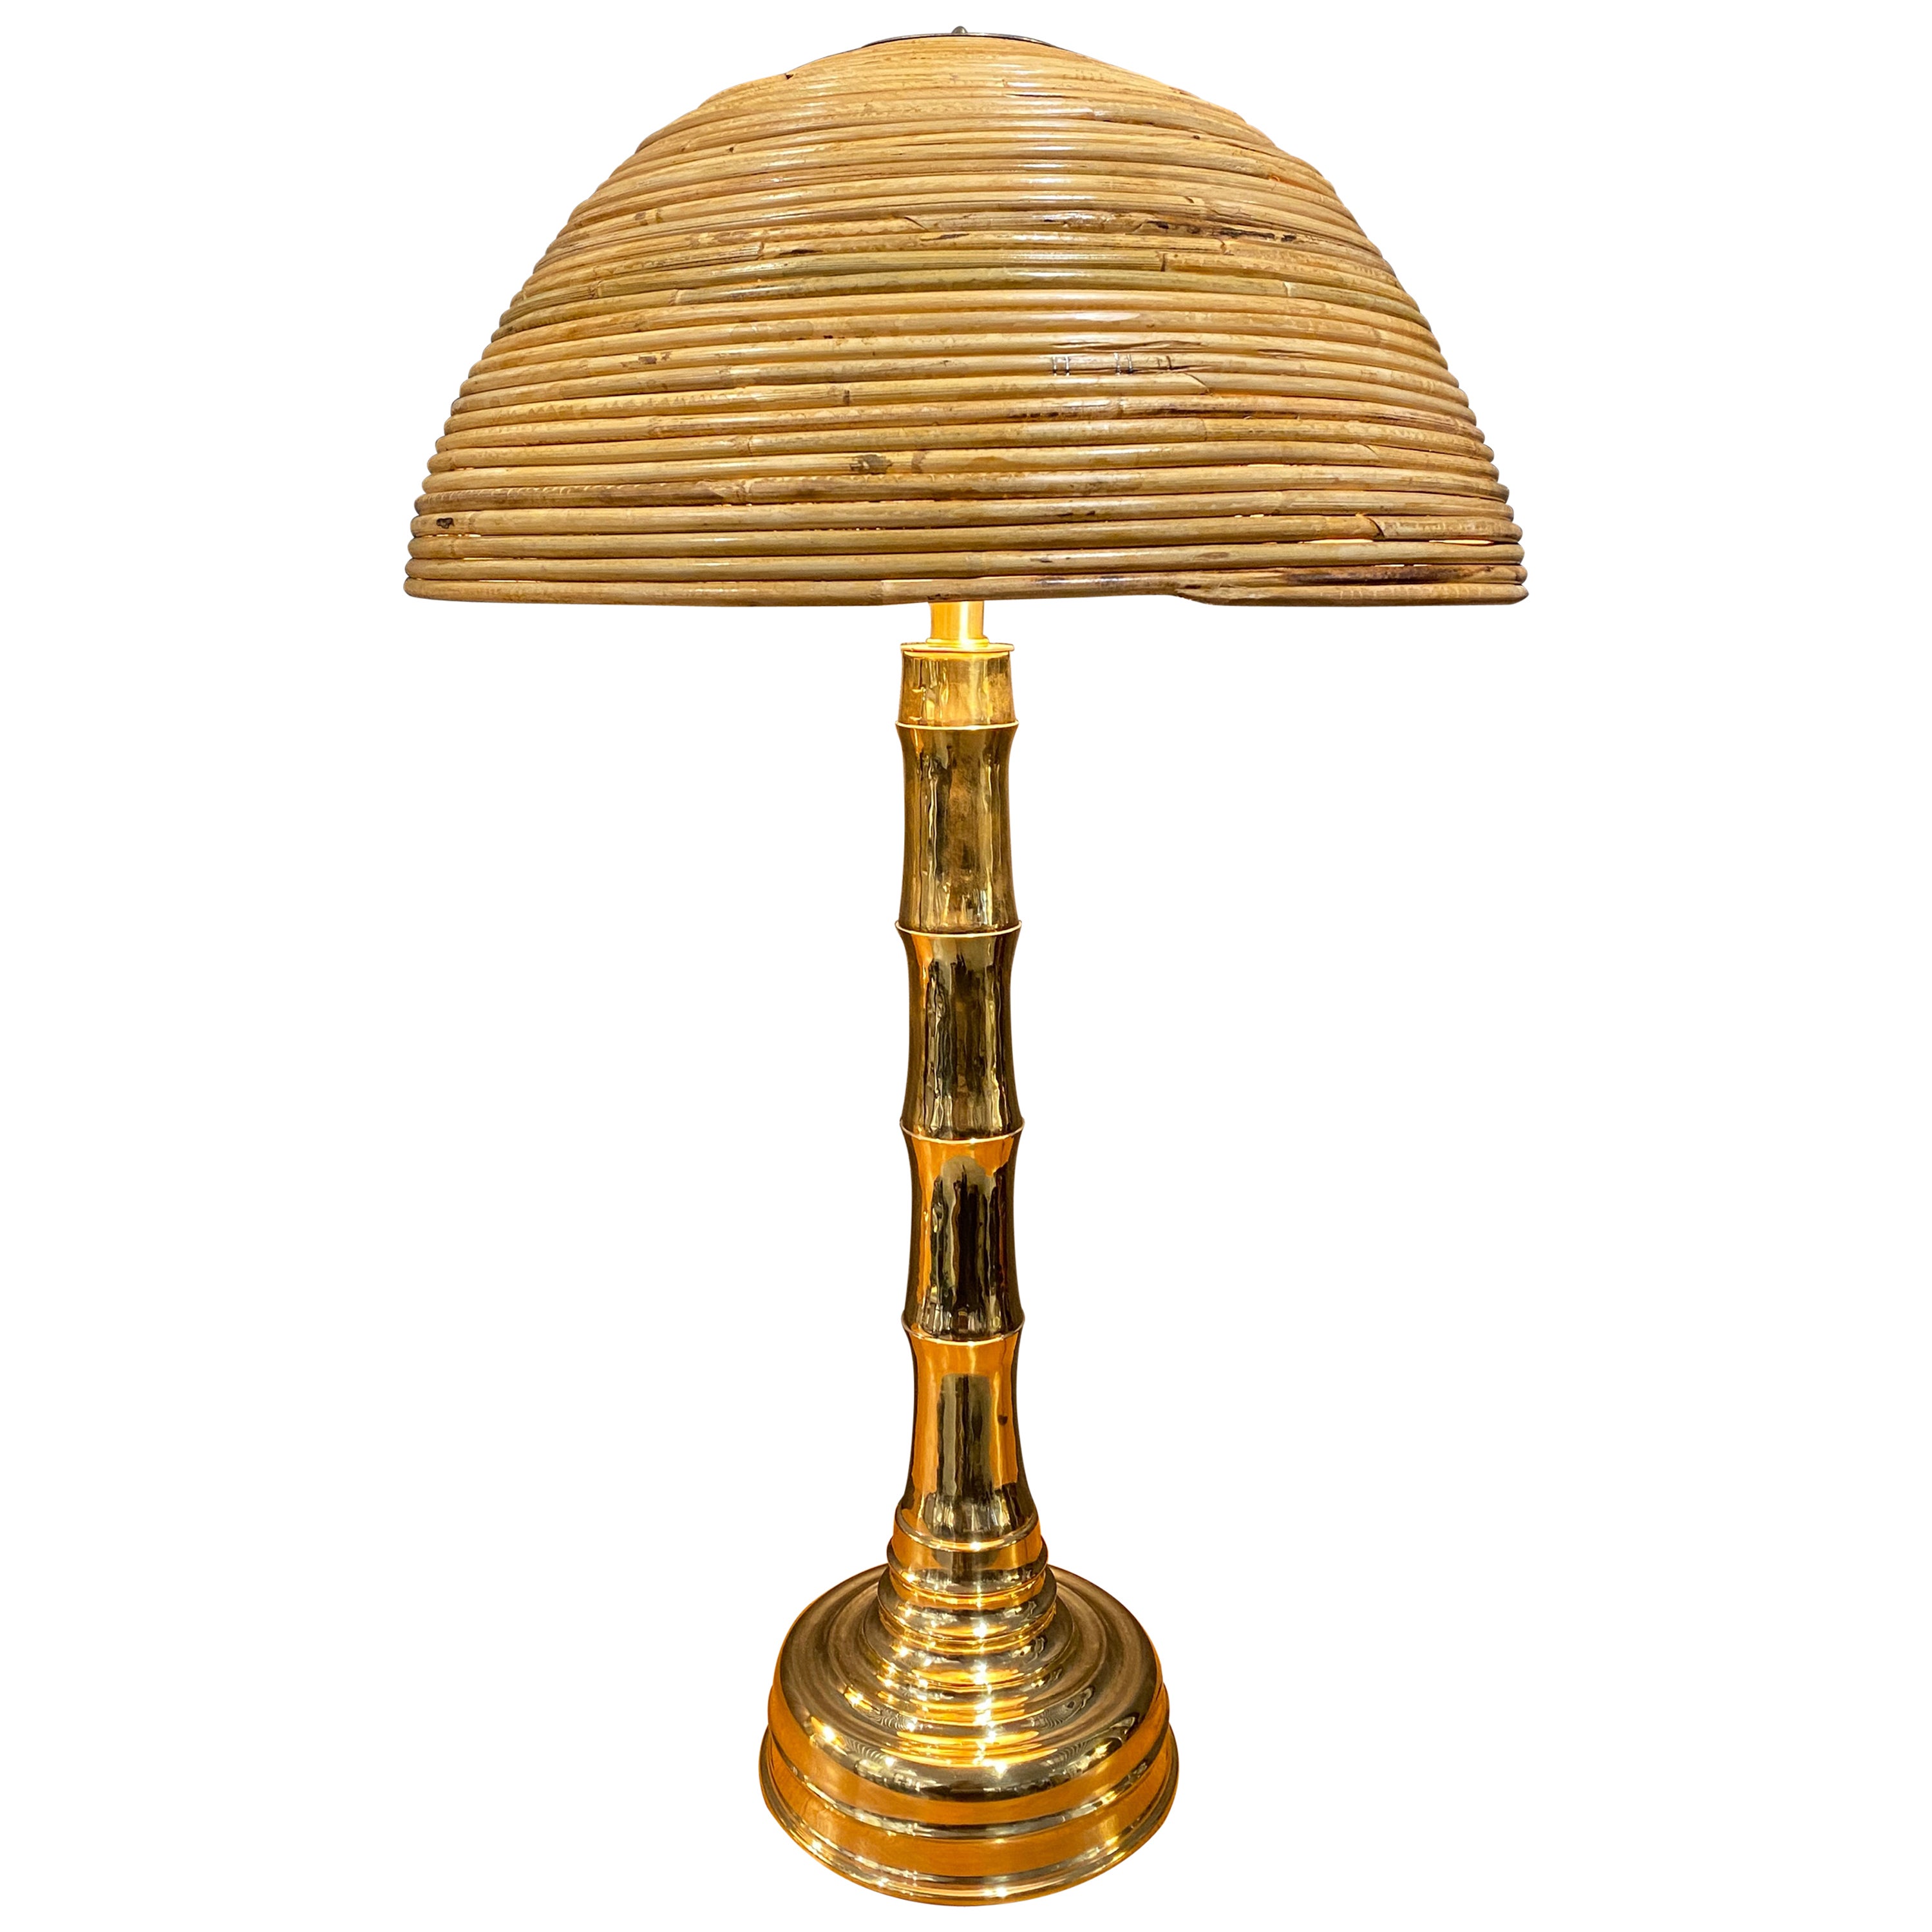 Italian Contemporary Gabriella Crespi Style Brass Lamp with Bamboo Lampshade